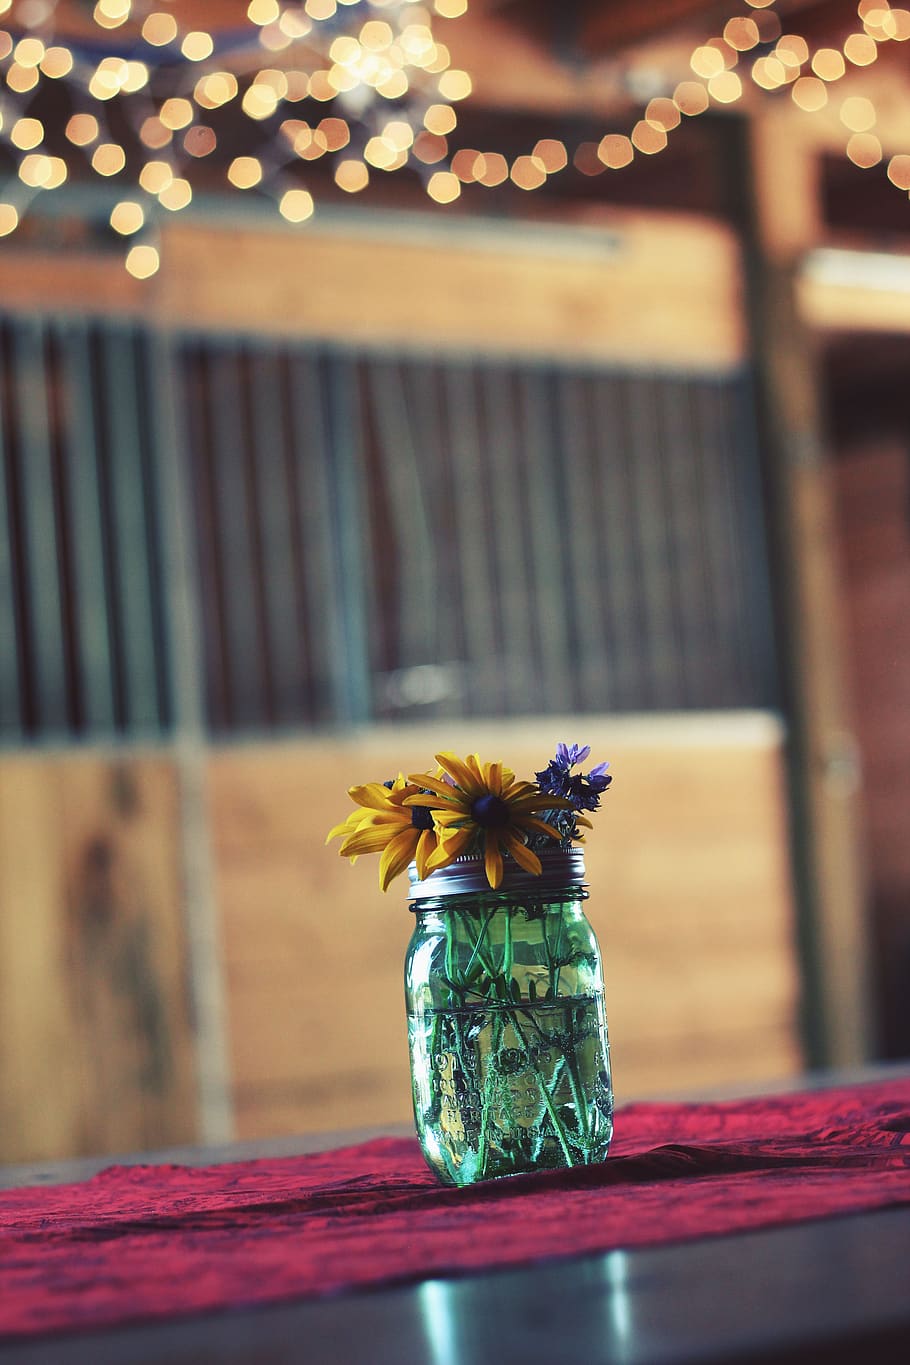 glass, jar, container, water, flowers, display, interior, table, bokeh, focus on foreground